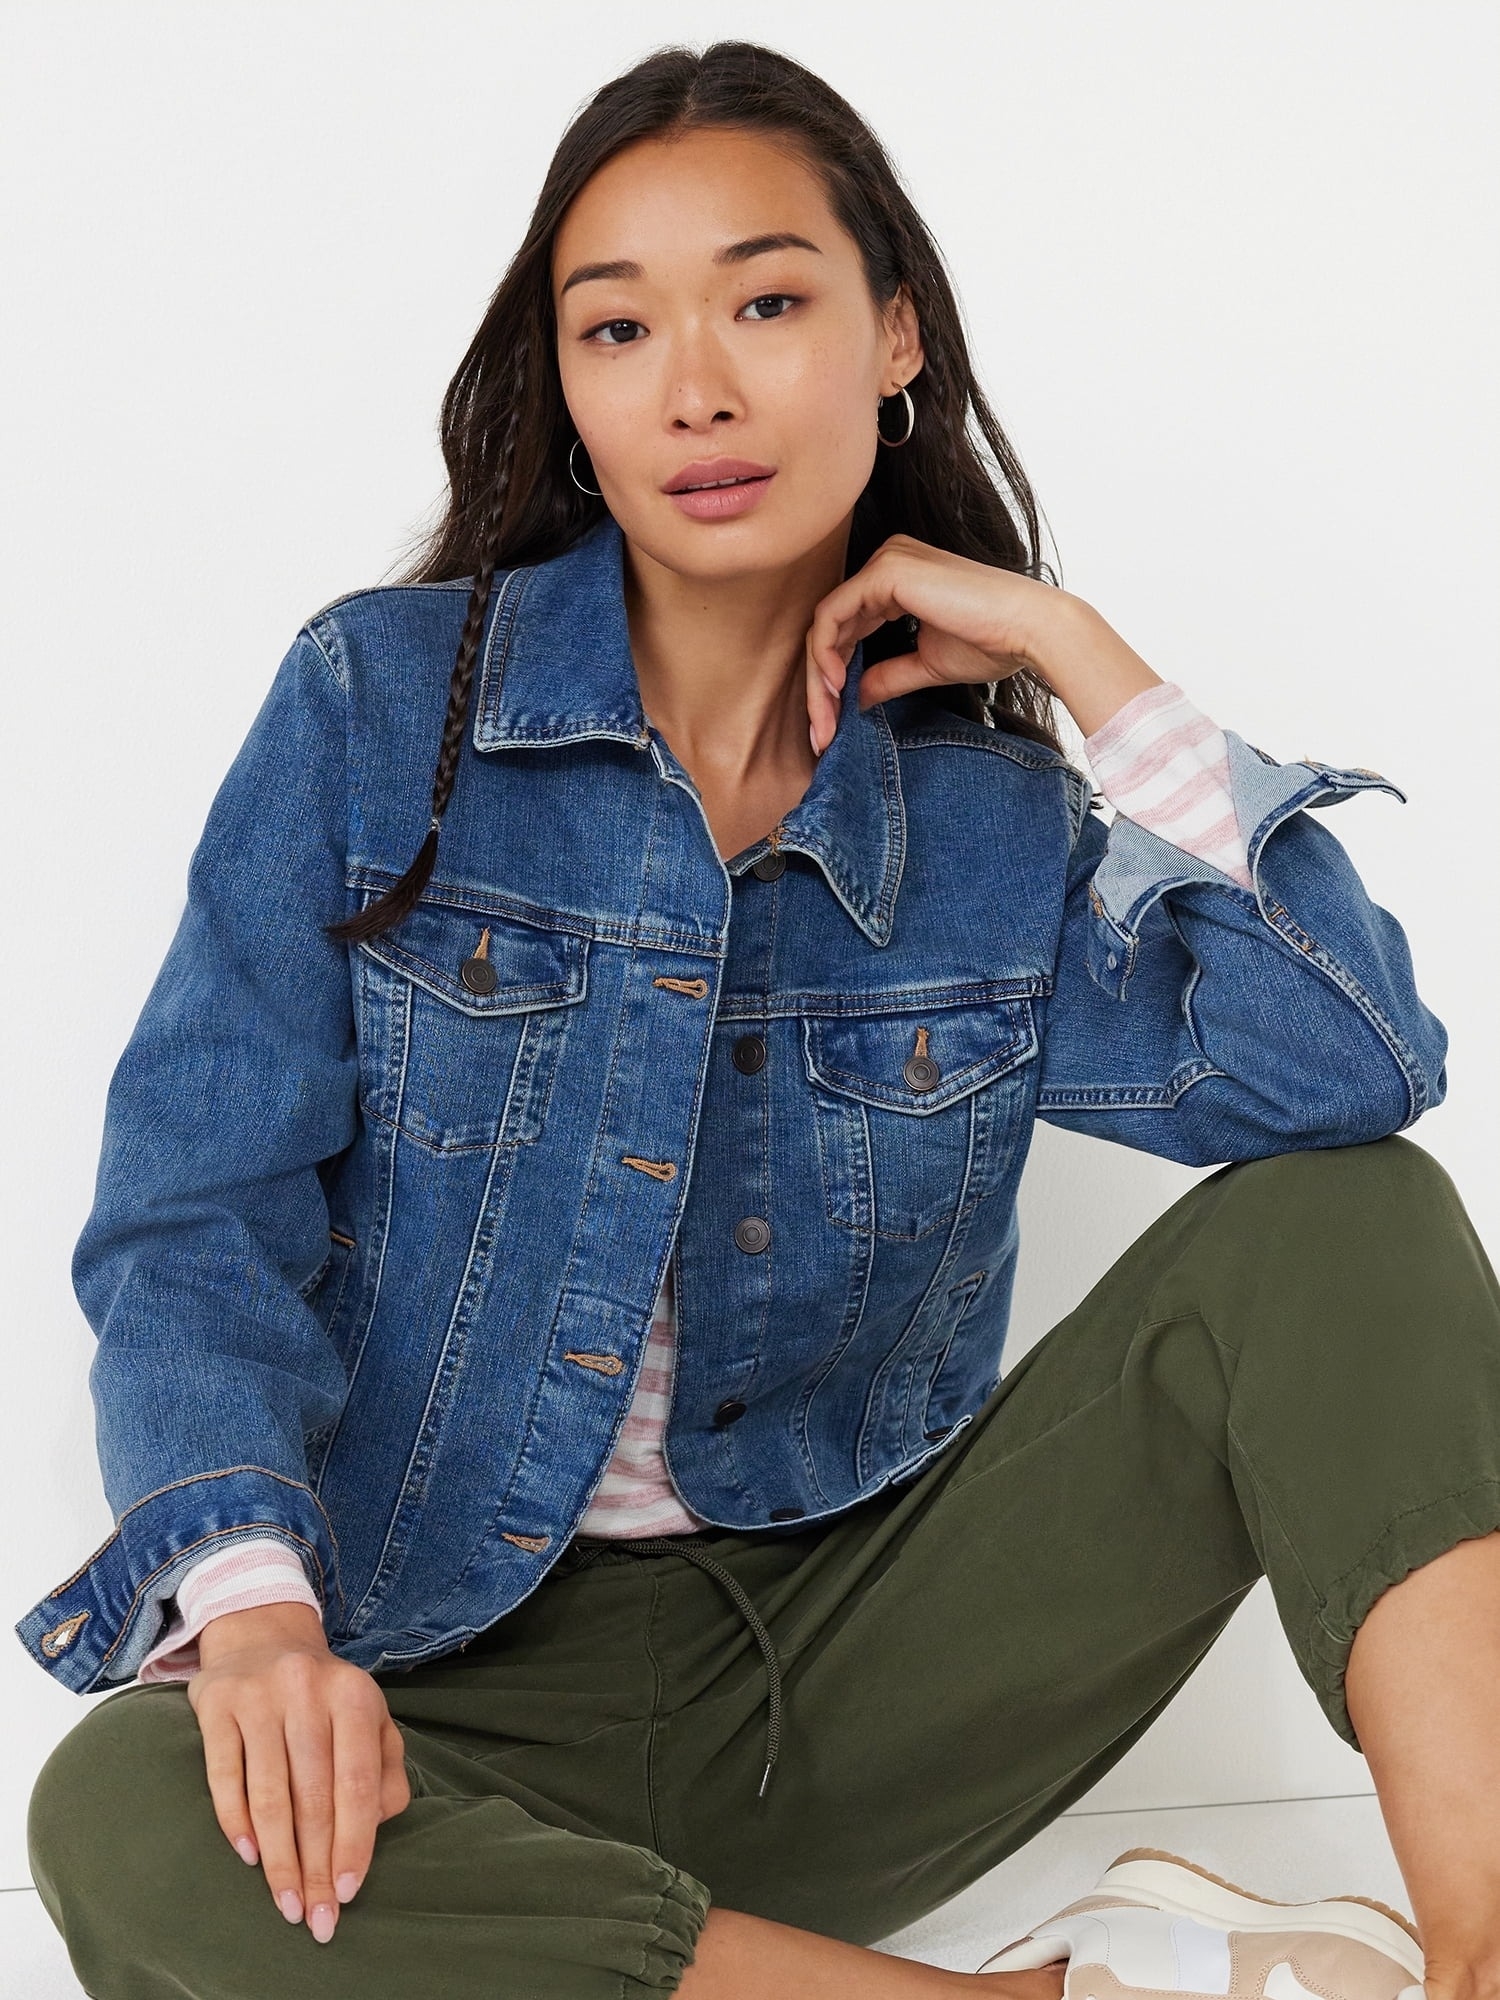 A model wearing a casual denim jacket, striped tee, olive green pants, and white sneakers